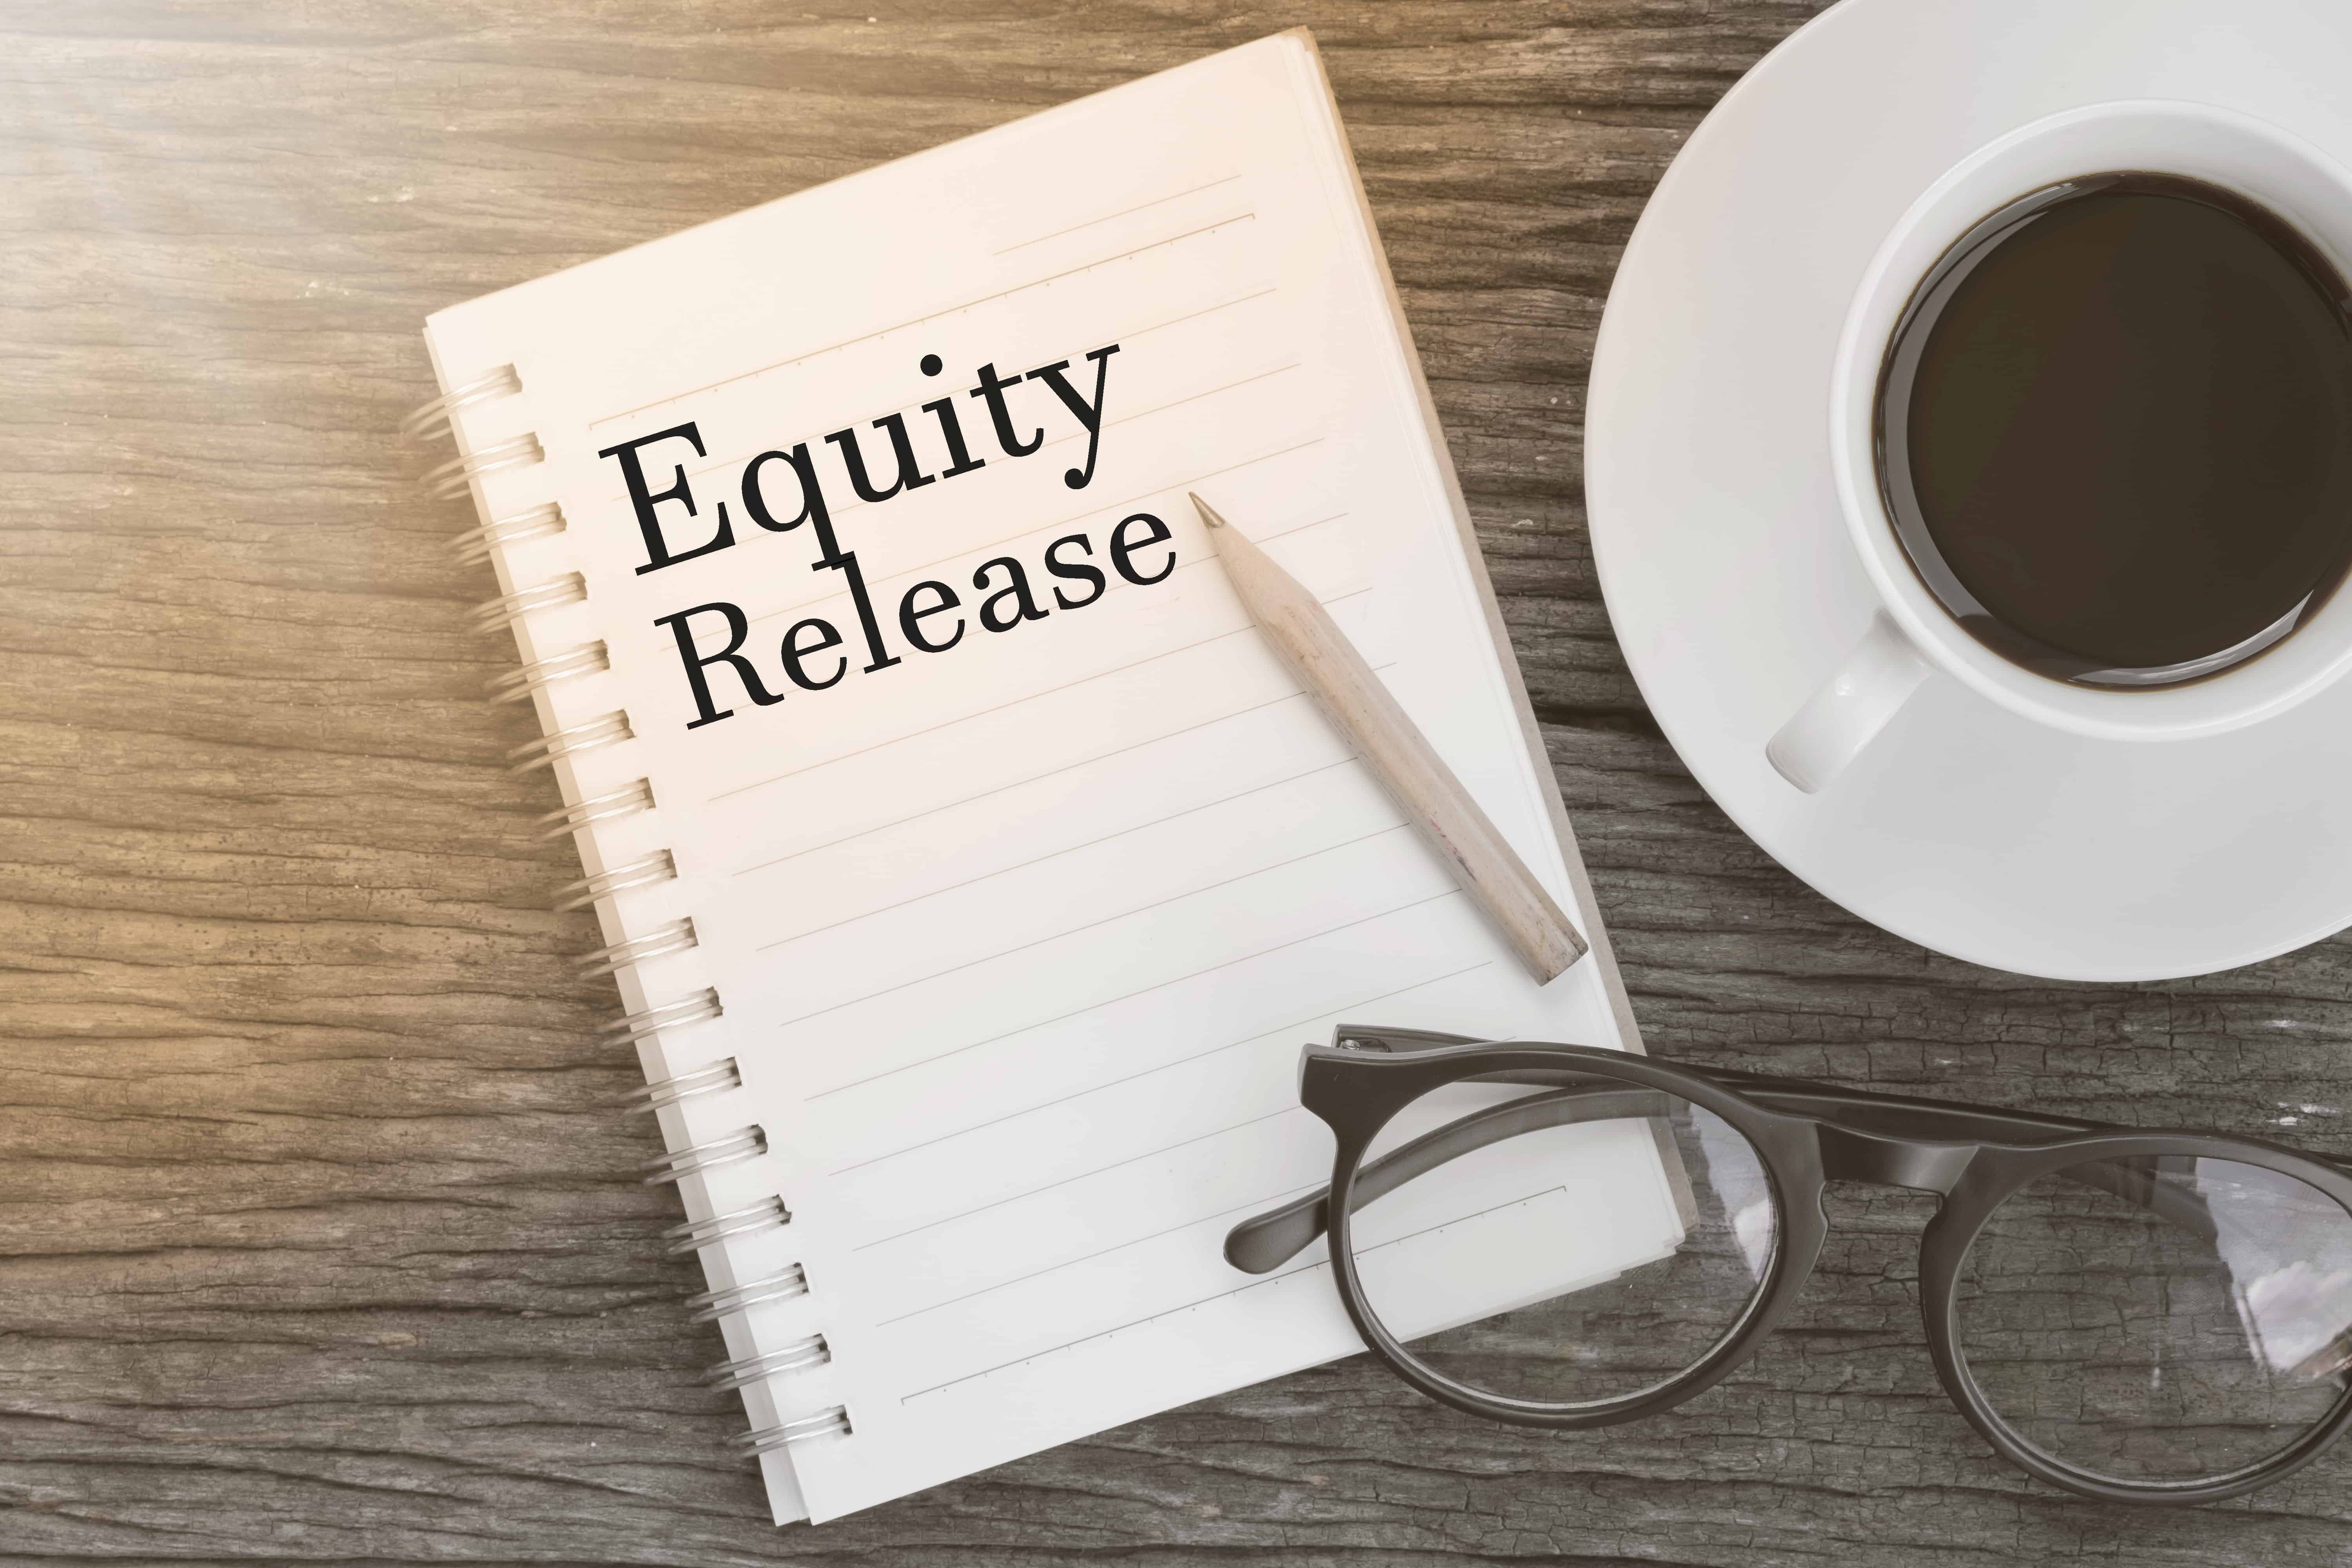 Criterion joins the Equity Release Council